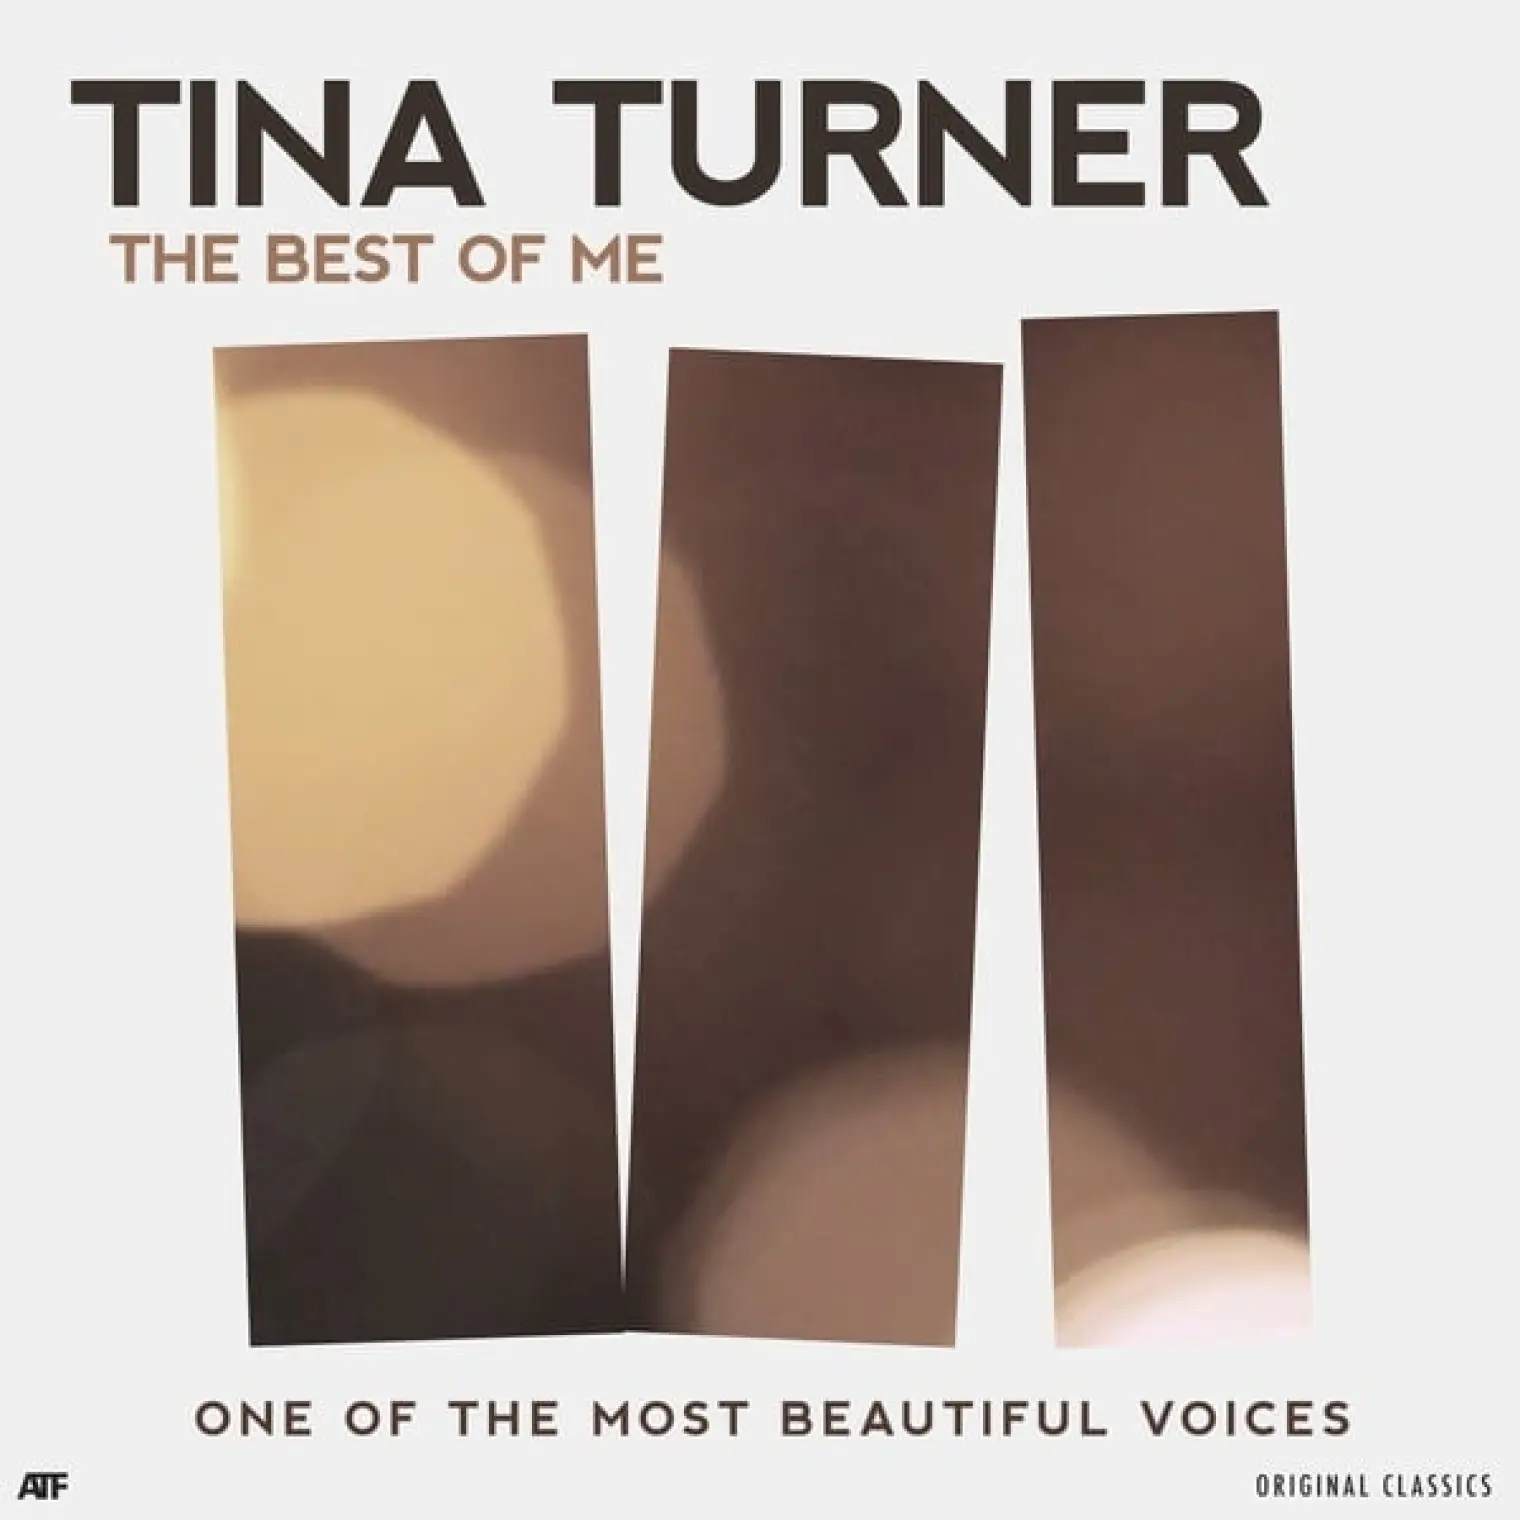 The Best of Me -  Tina Turner 